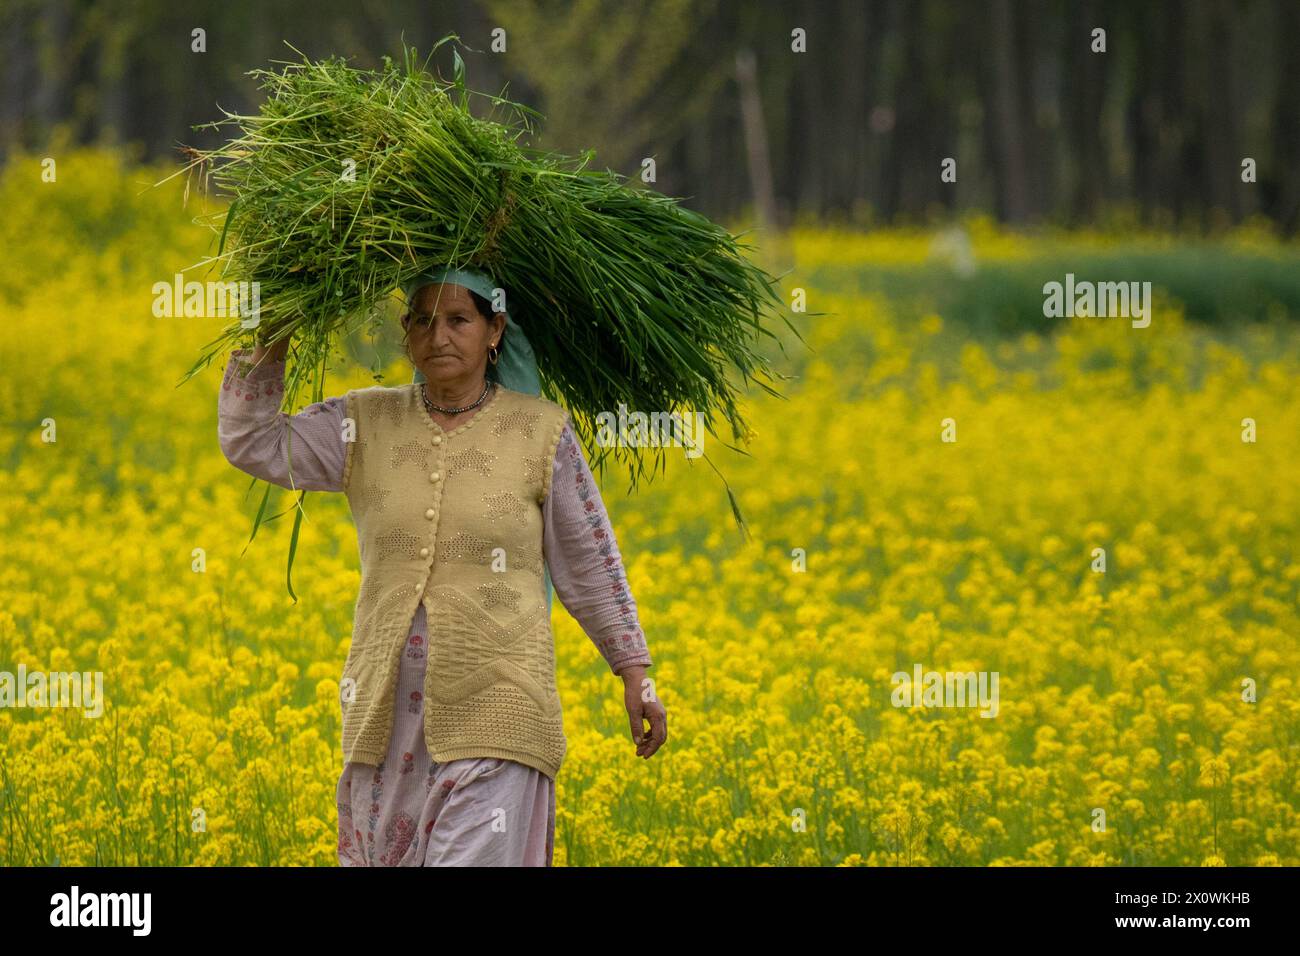 A Kashmiri elderly woman carrying a sack walks through the blooming mustard fields during the spring season in Pulwama, south of Srinagar. The spring season in Kashmir valley is a period of two long months starting from mid-March and ends in mid-May. According to the Directorate of Agriculture of the state government of Jammu and Kashmir, the Kashmir valley comprising six districts has an estimated area of 65 thousand hectares of paddy land under mustard cultivation, which is about 40 per cent of the total area under paddy. Stock Photo